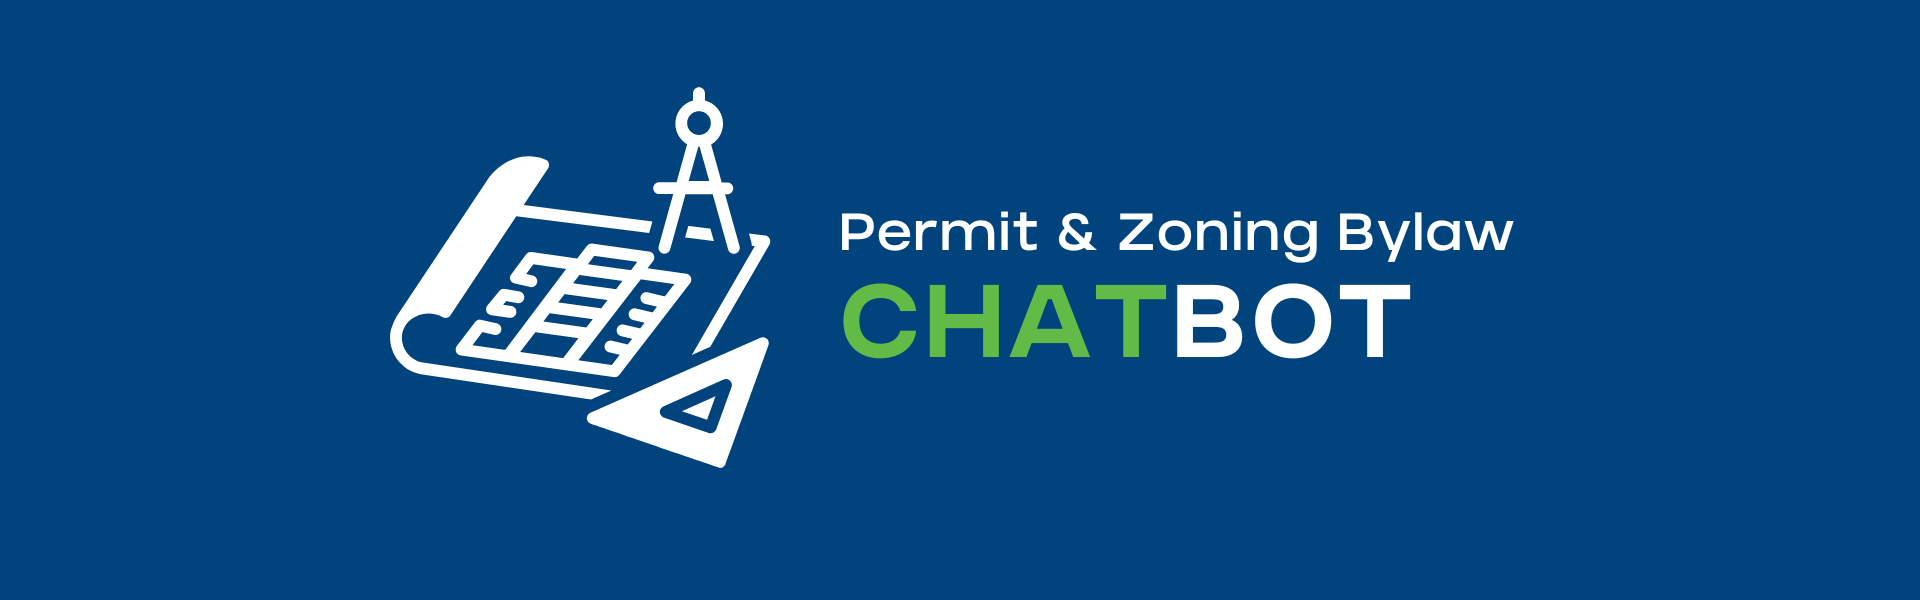 Logo for the Permit & Zoning Bylaw Chatbot, with icons of blueprints and protractors.